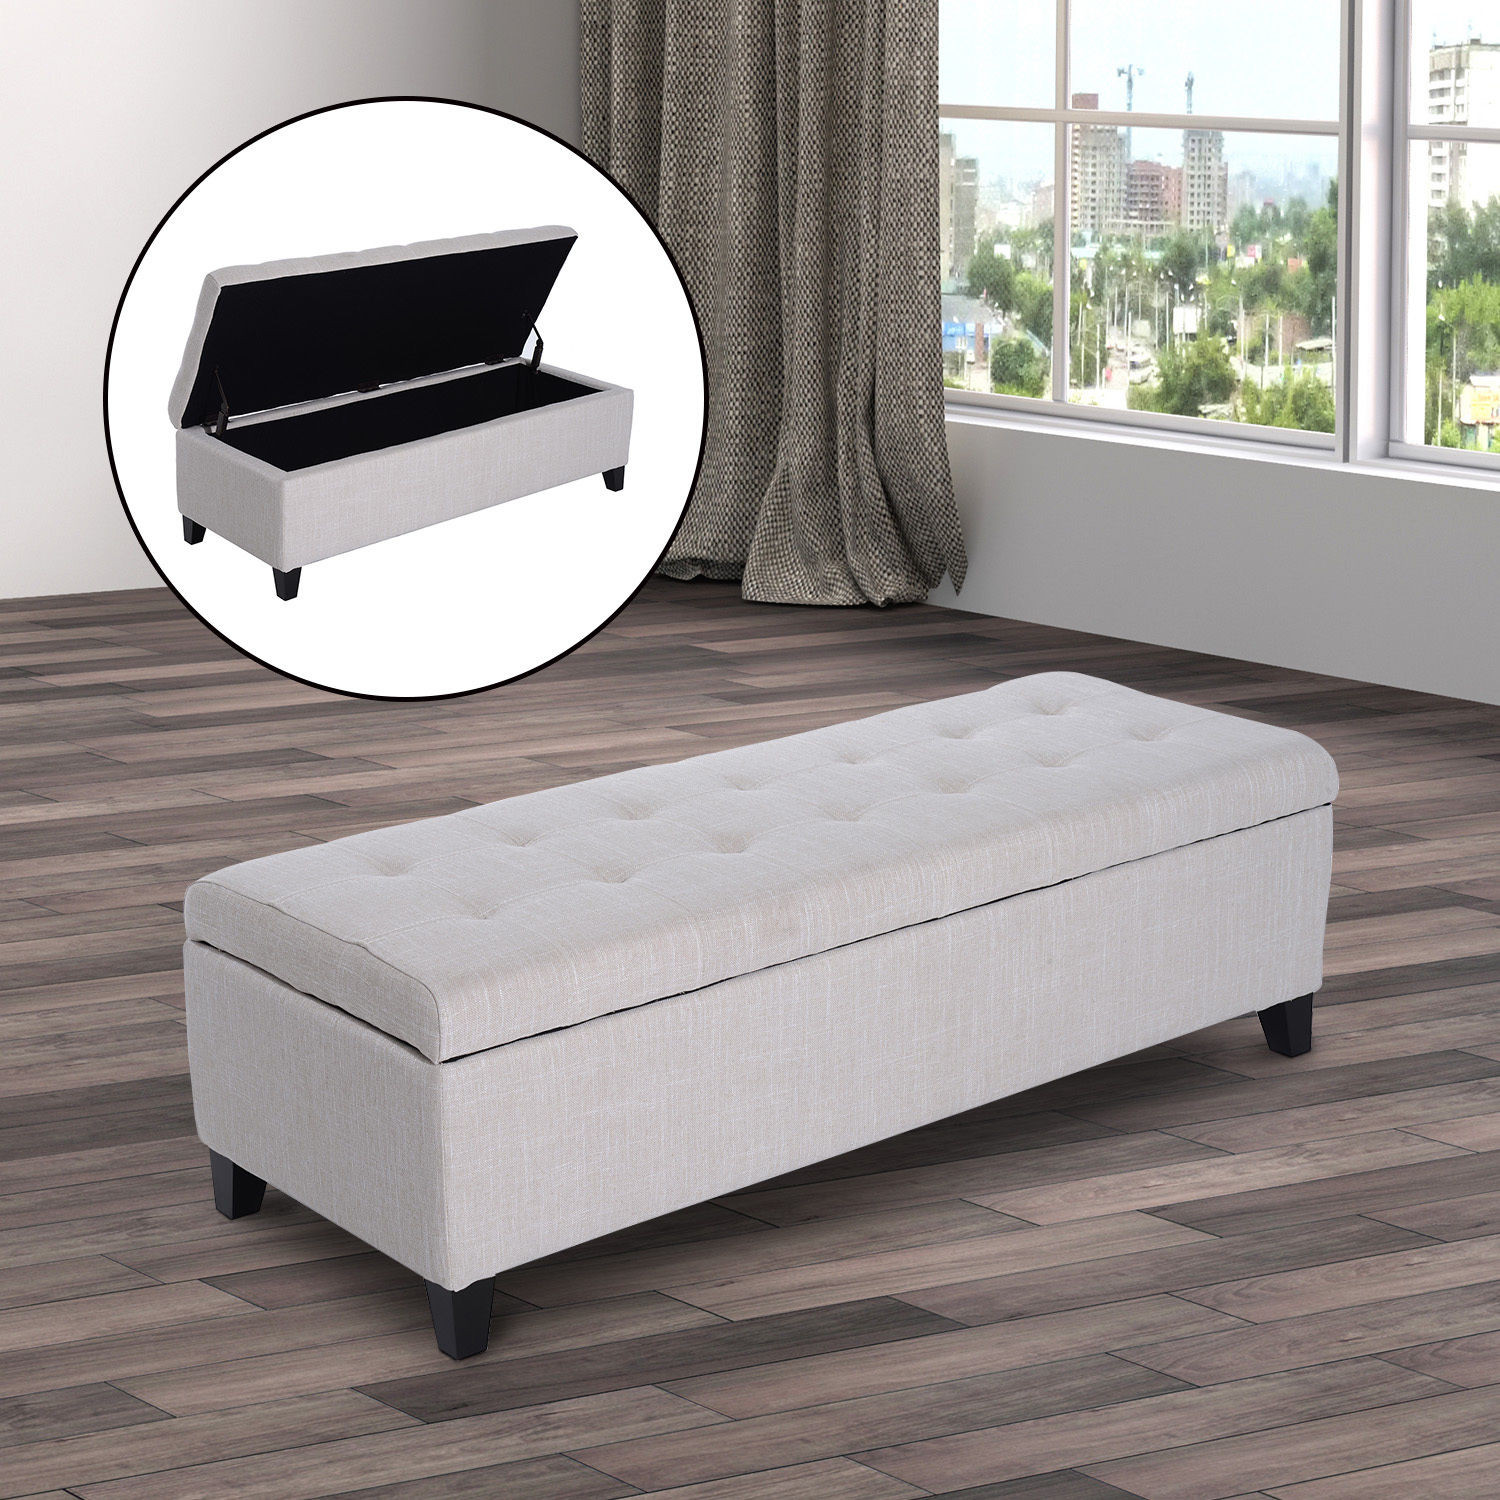 Large Storage Bench
 51" Tufted Top Storage Bench Ottoman Footrest Stool